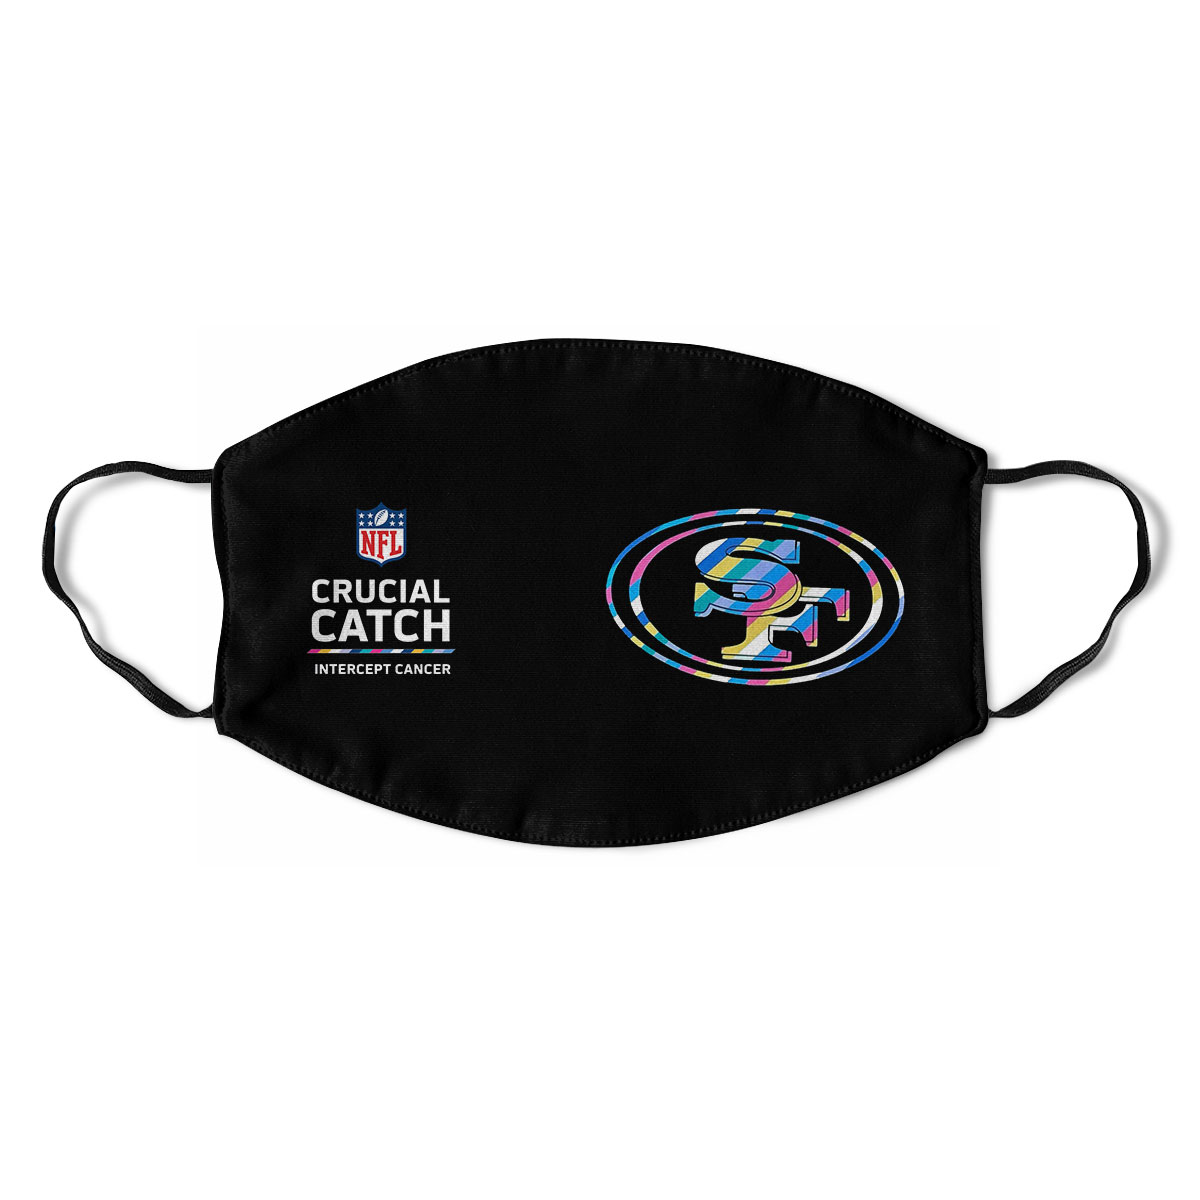 San Francisco 49ers Nfl Crucial Catch Multicolor Face Mask Anti-pollution